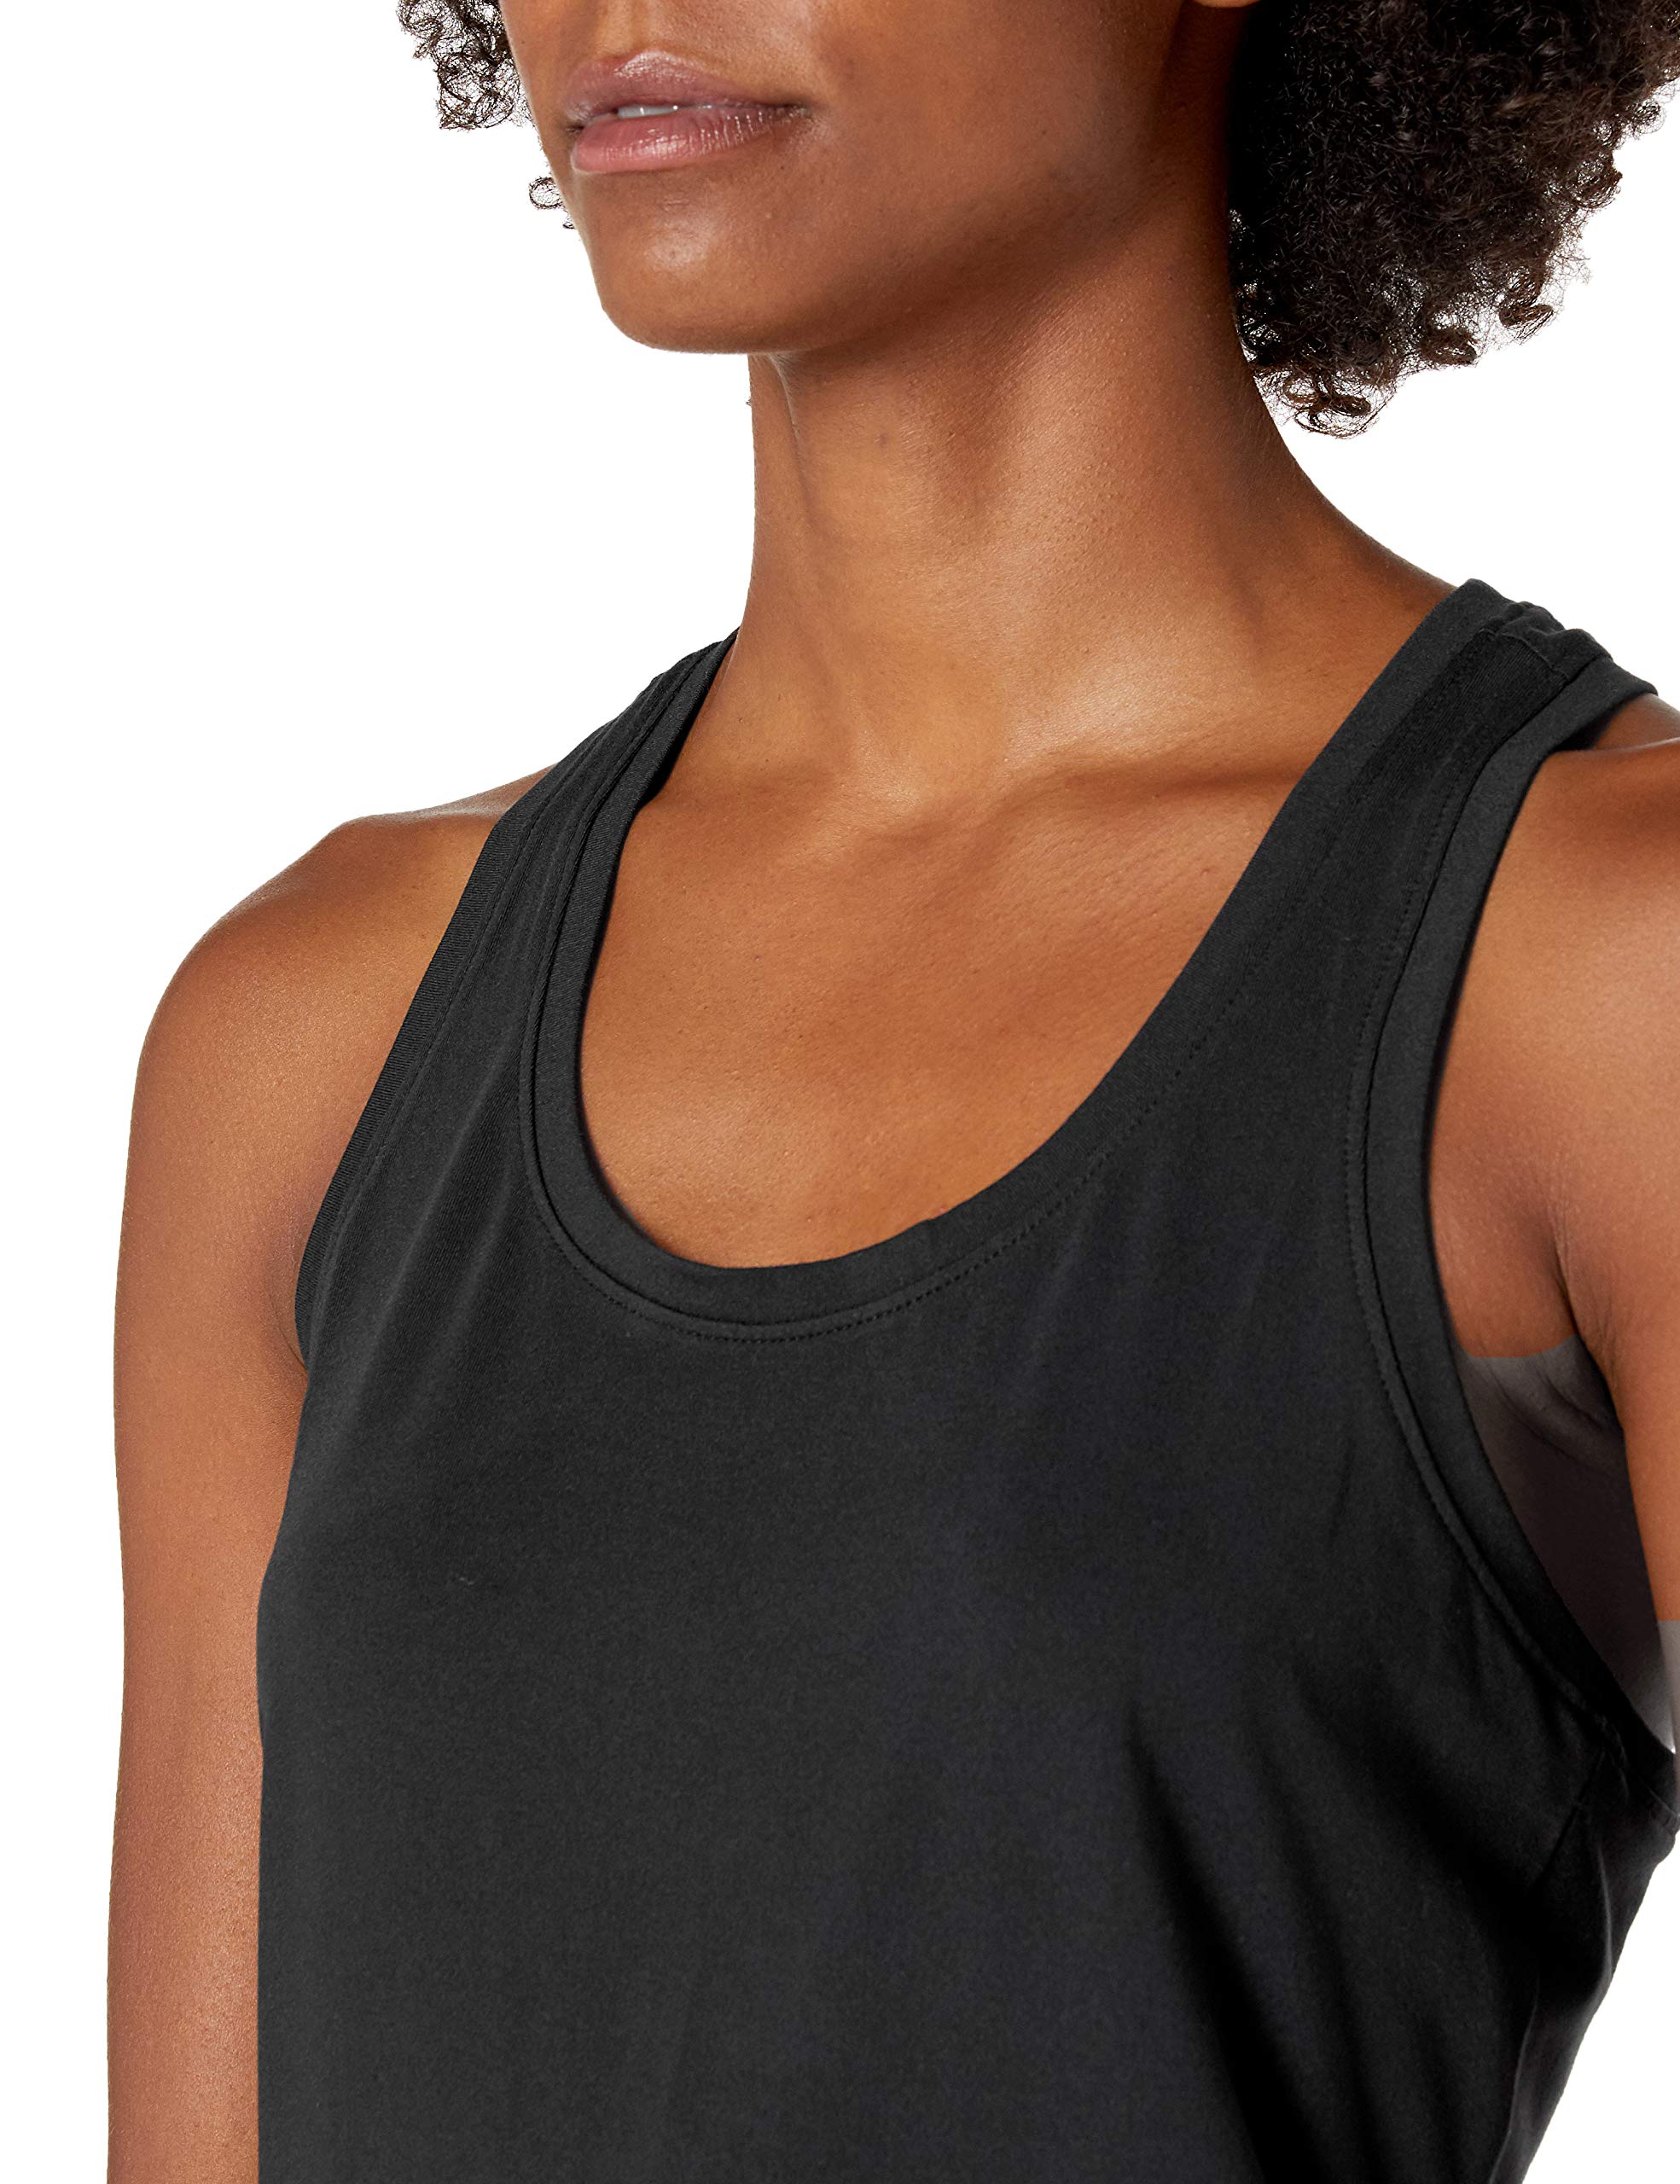 Amazon Essentials Women's Tech Stretch Racerback Tank Top (Available in Plus Size), Pack of 2, Black/Grey Camo, X-Large